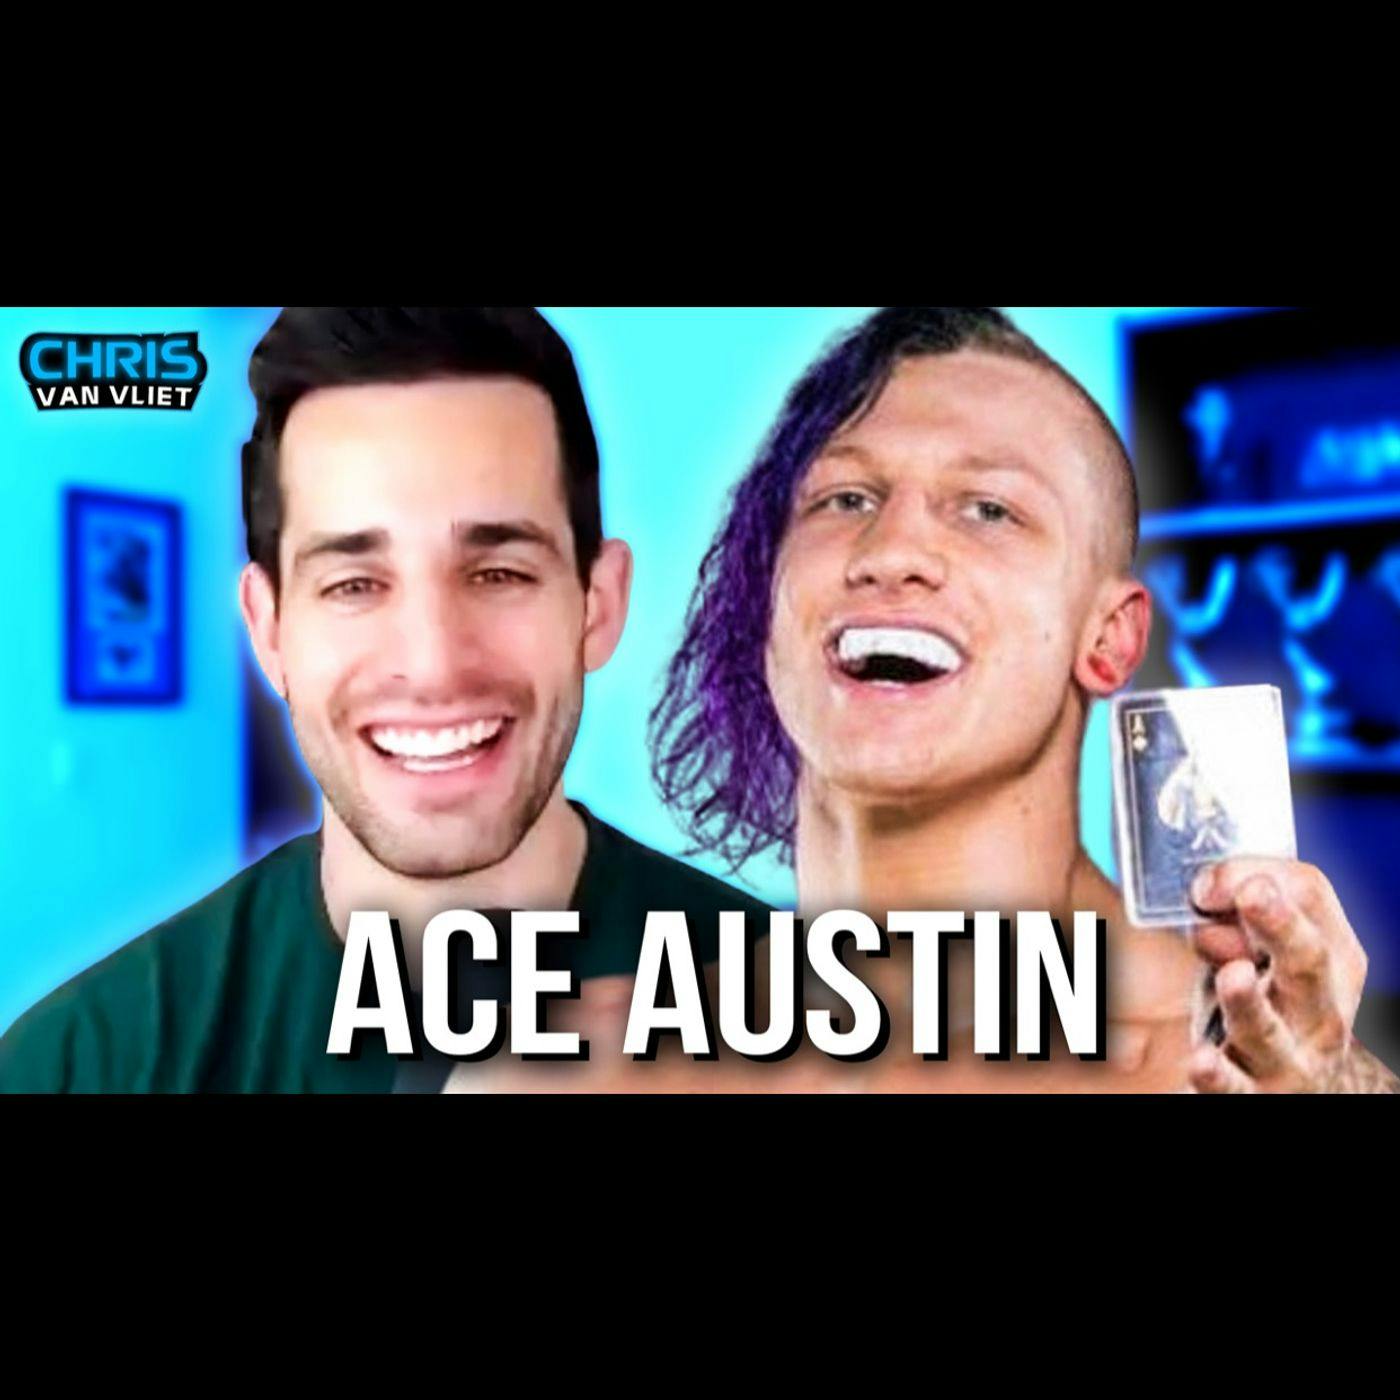 Ace Austin on winning the X Division title, comparisons to AJ Styles, wanting to become the youngest Impact World Champion